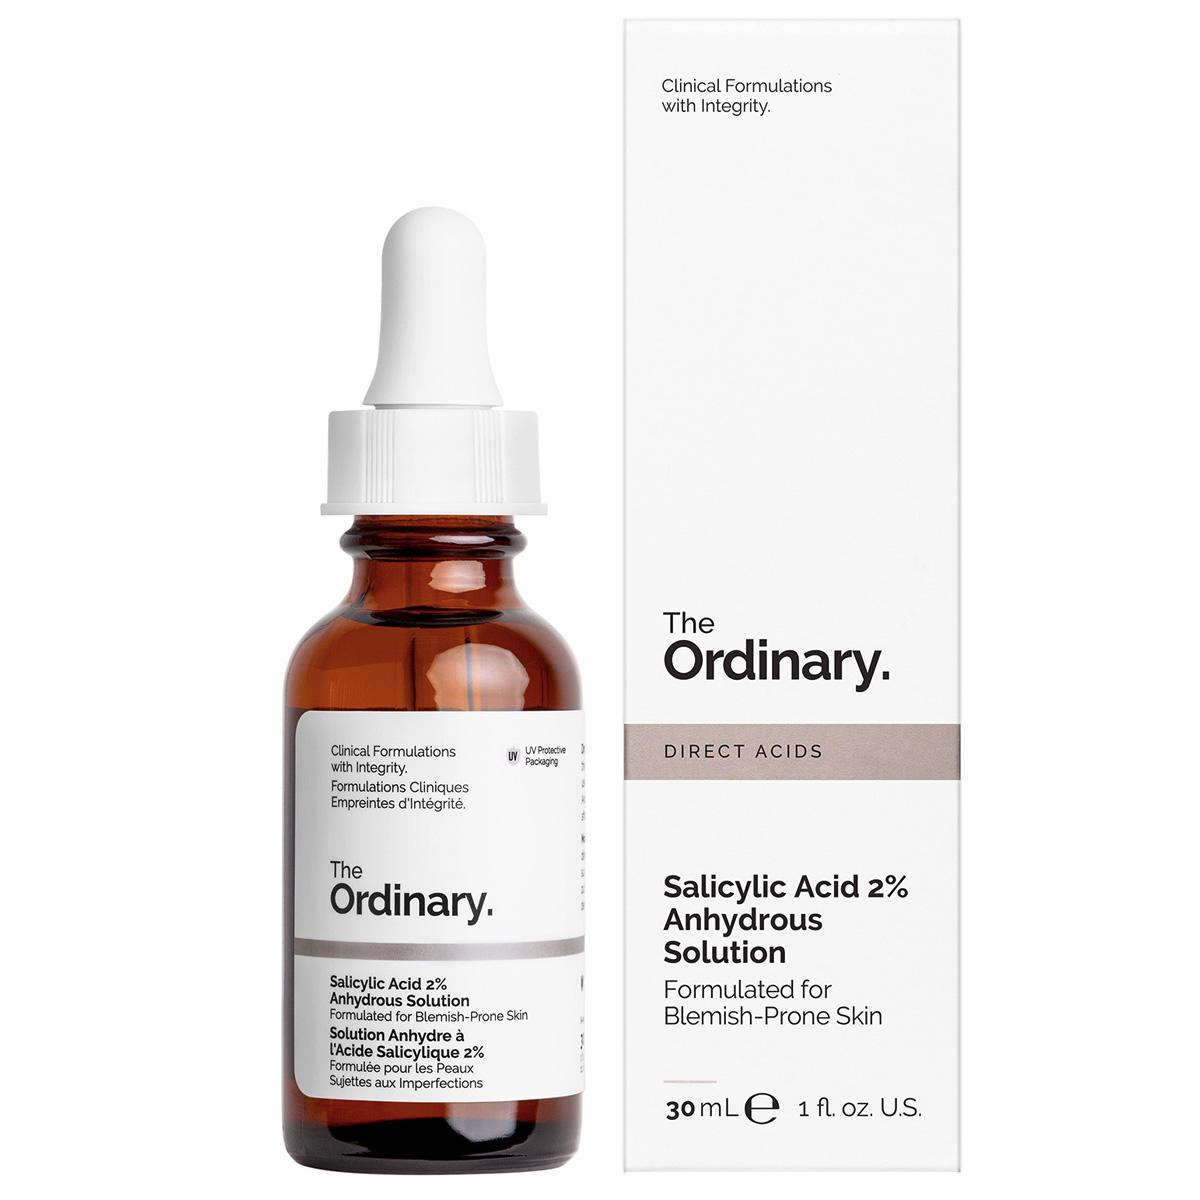 The Ordinary Salicylic Acid 2% Anhydrous Solution 30 ml - 1